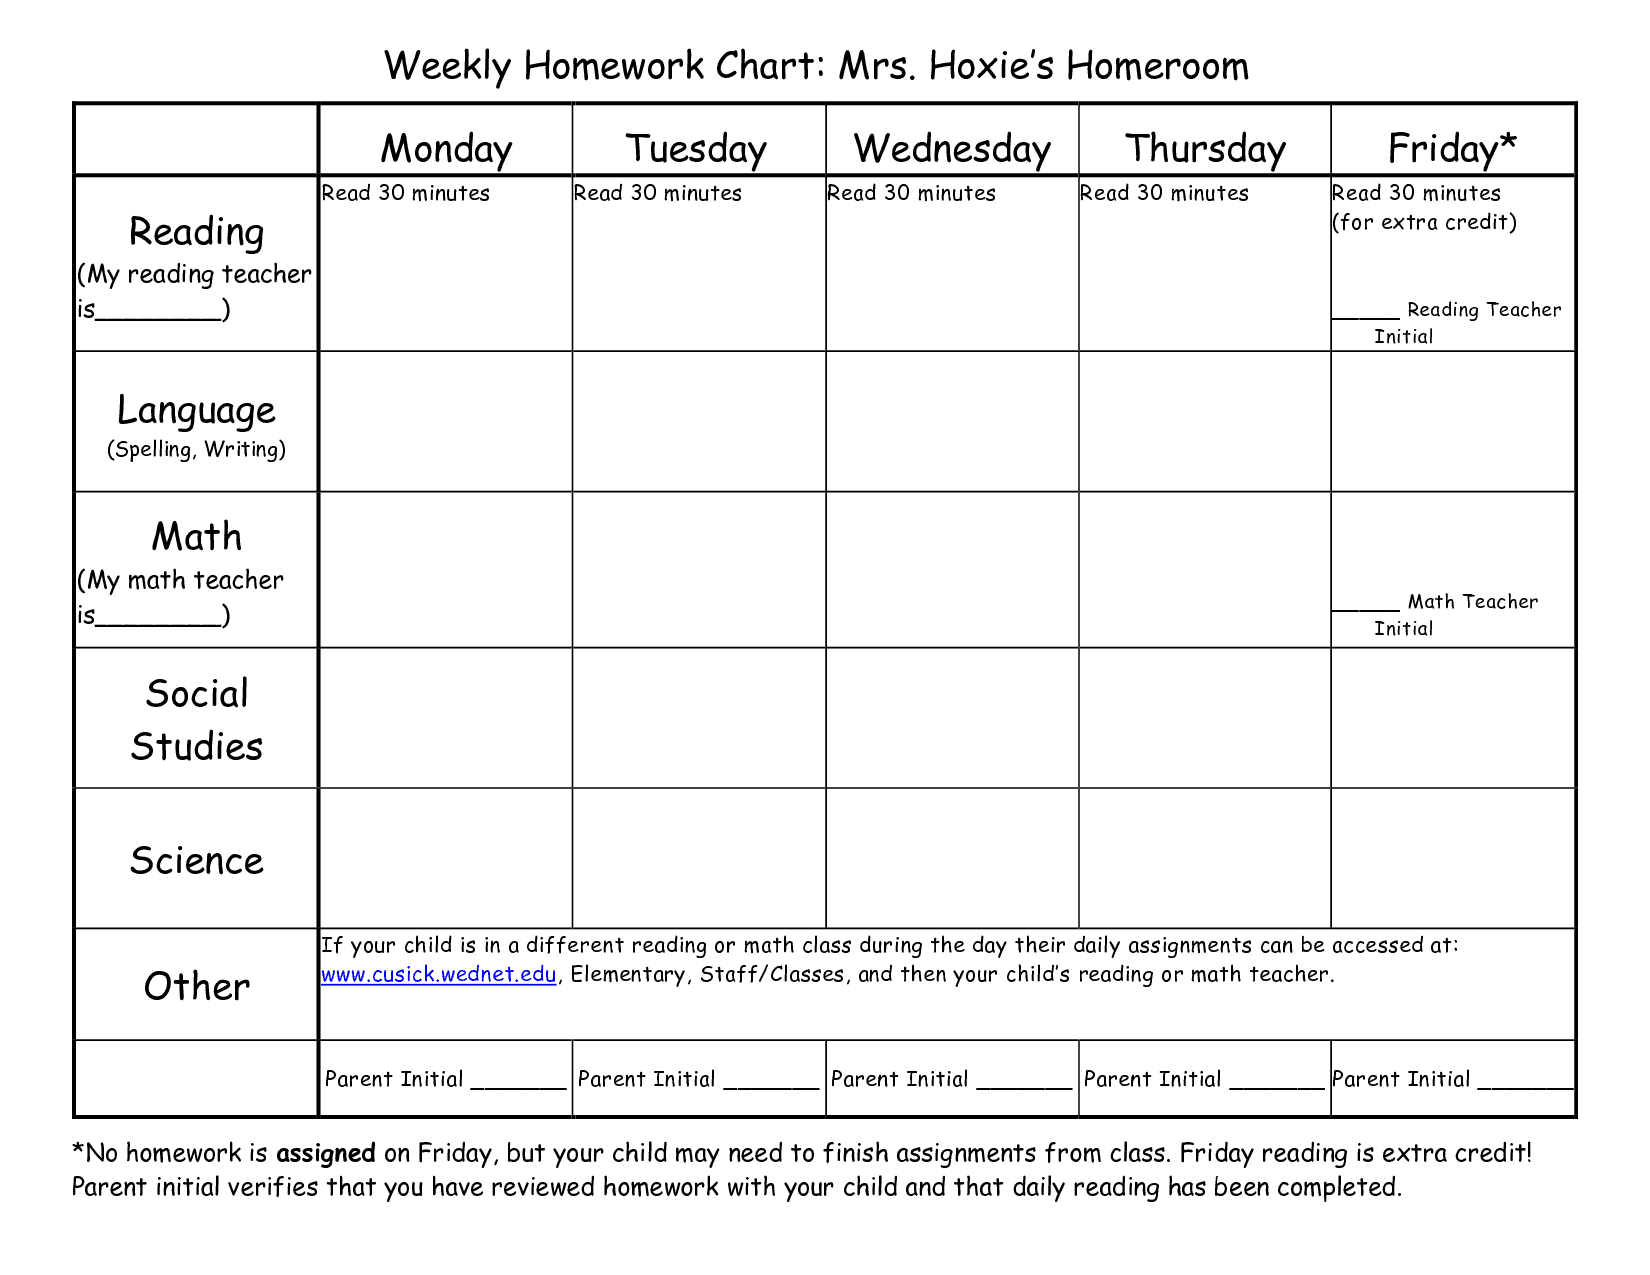 assignment planner template pdf